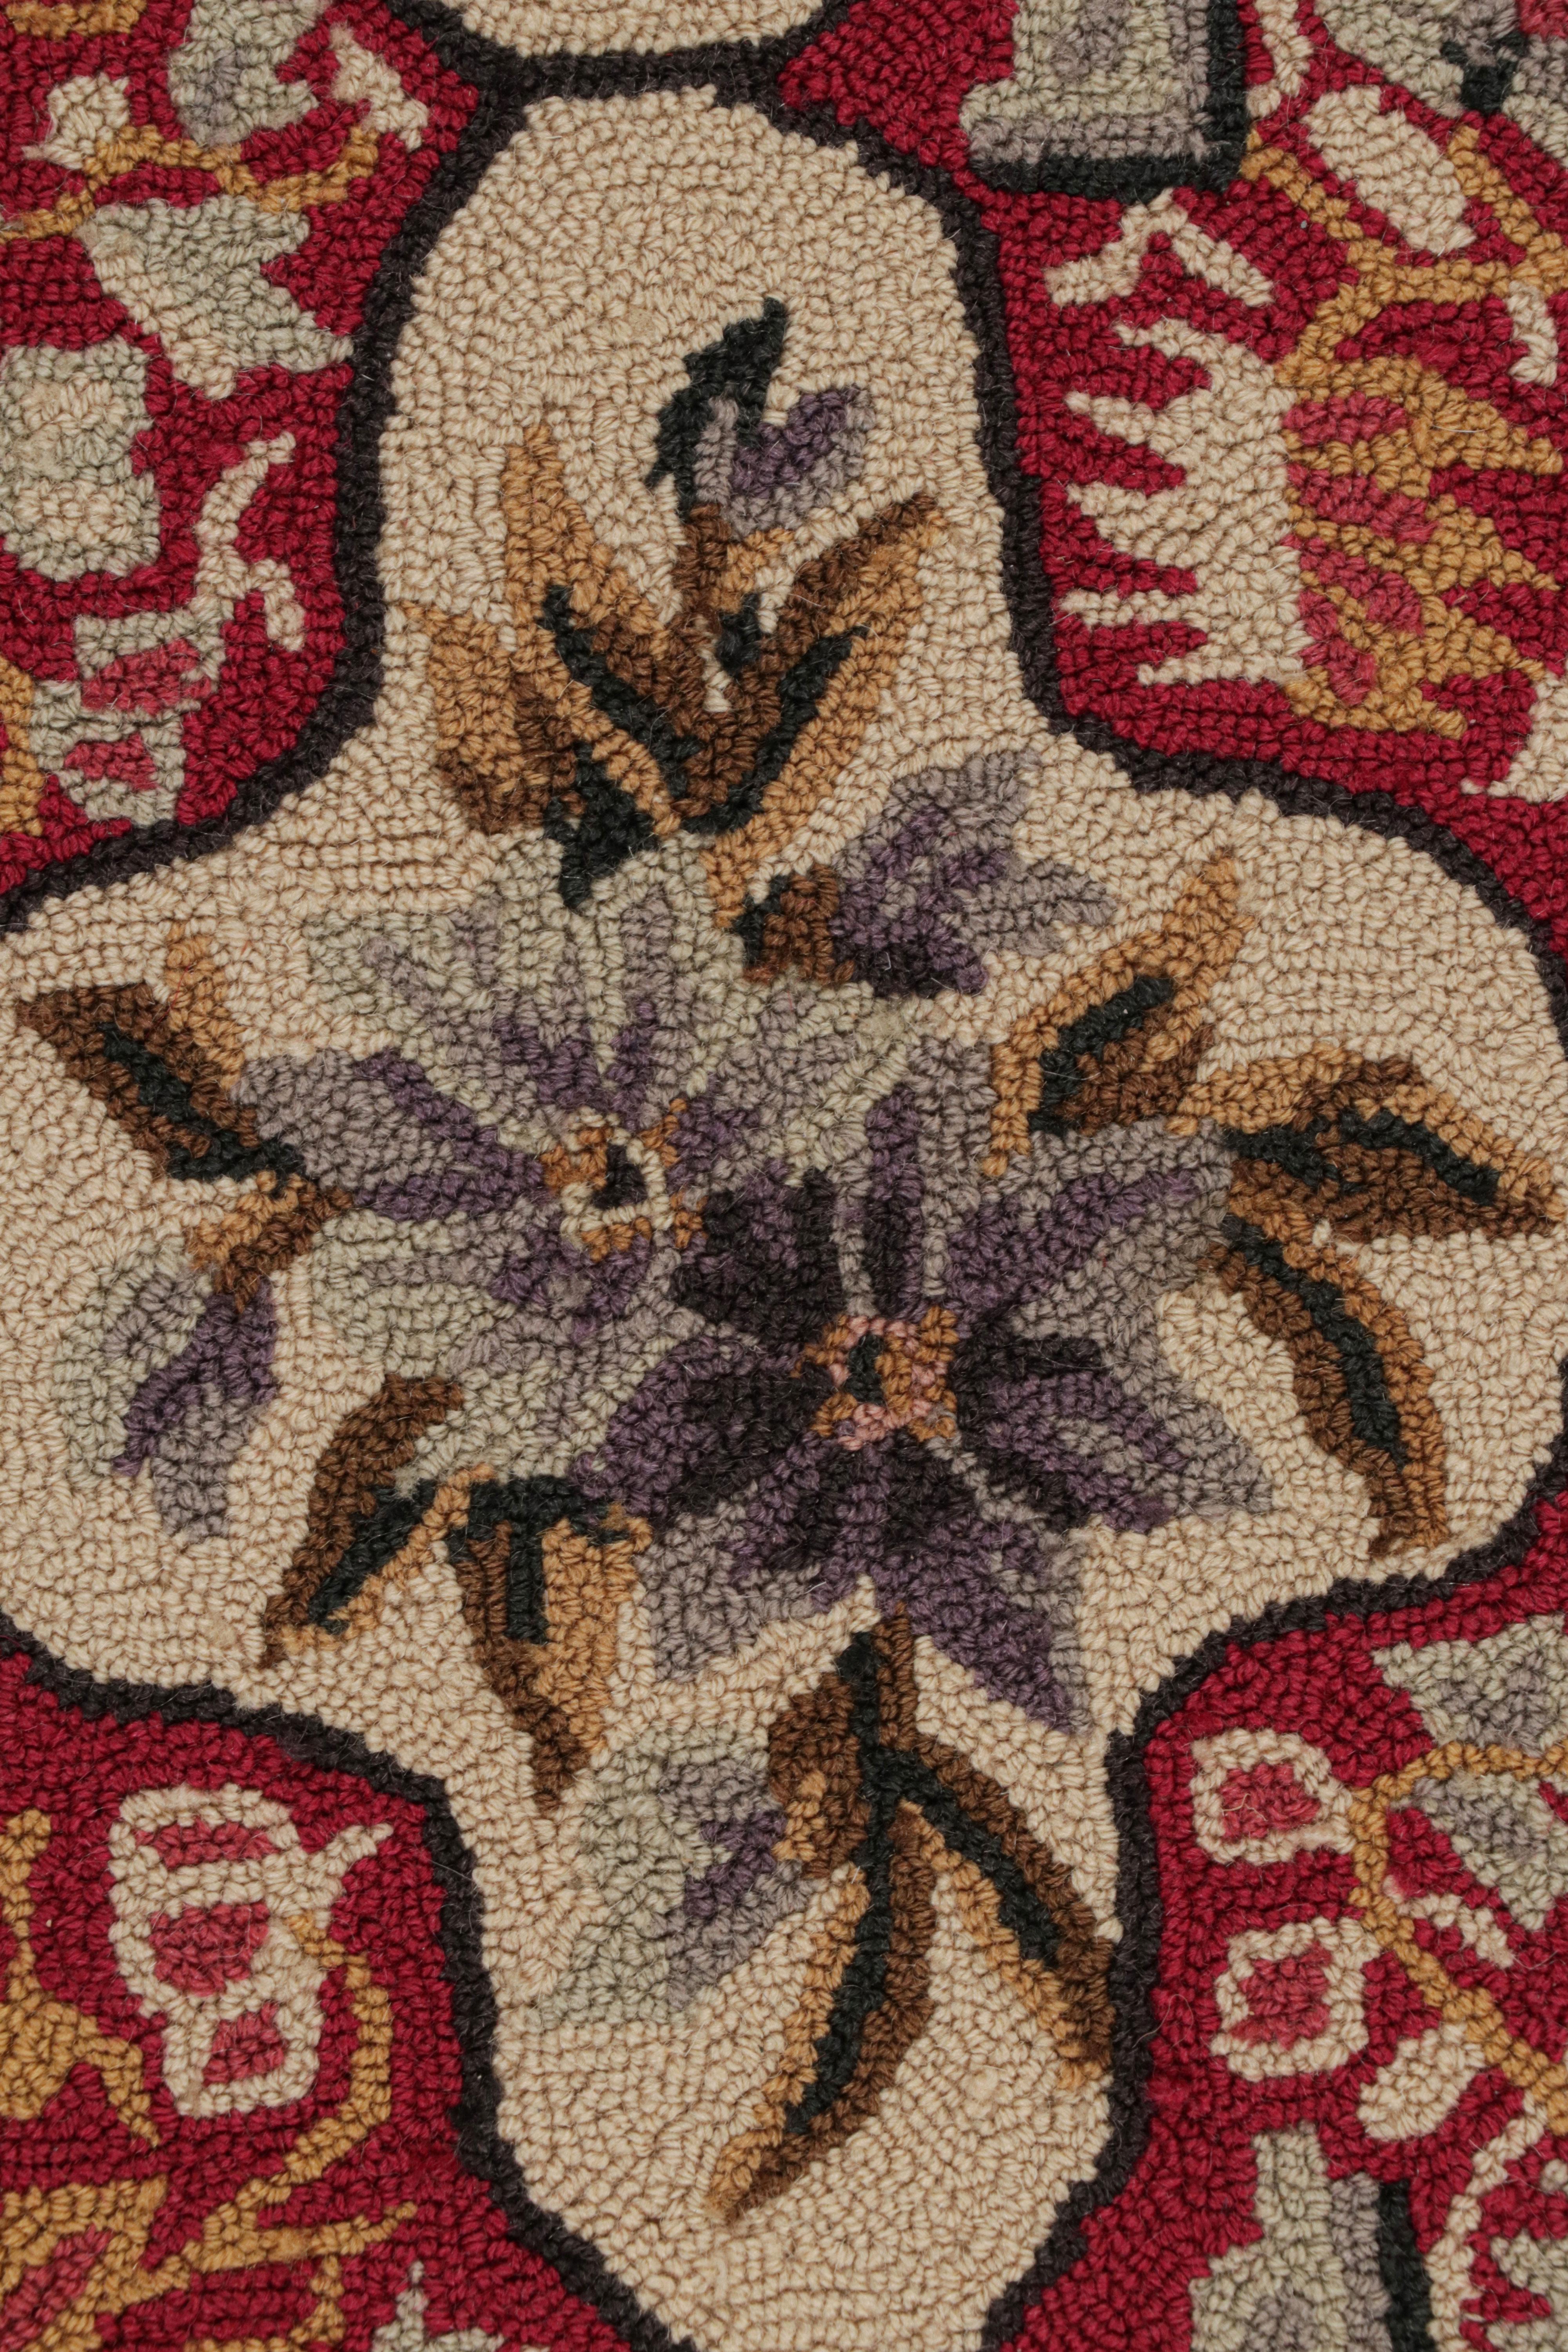 Mid-17th Century Rare Antique Hooked Rug with Red & Beige Floral Patterns, from Rug & Kilim For Sale